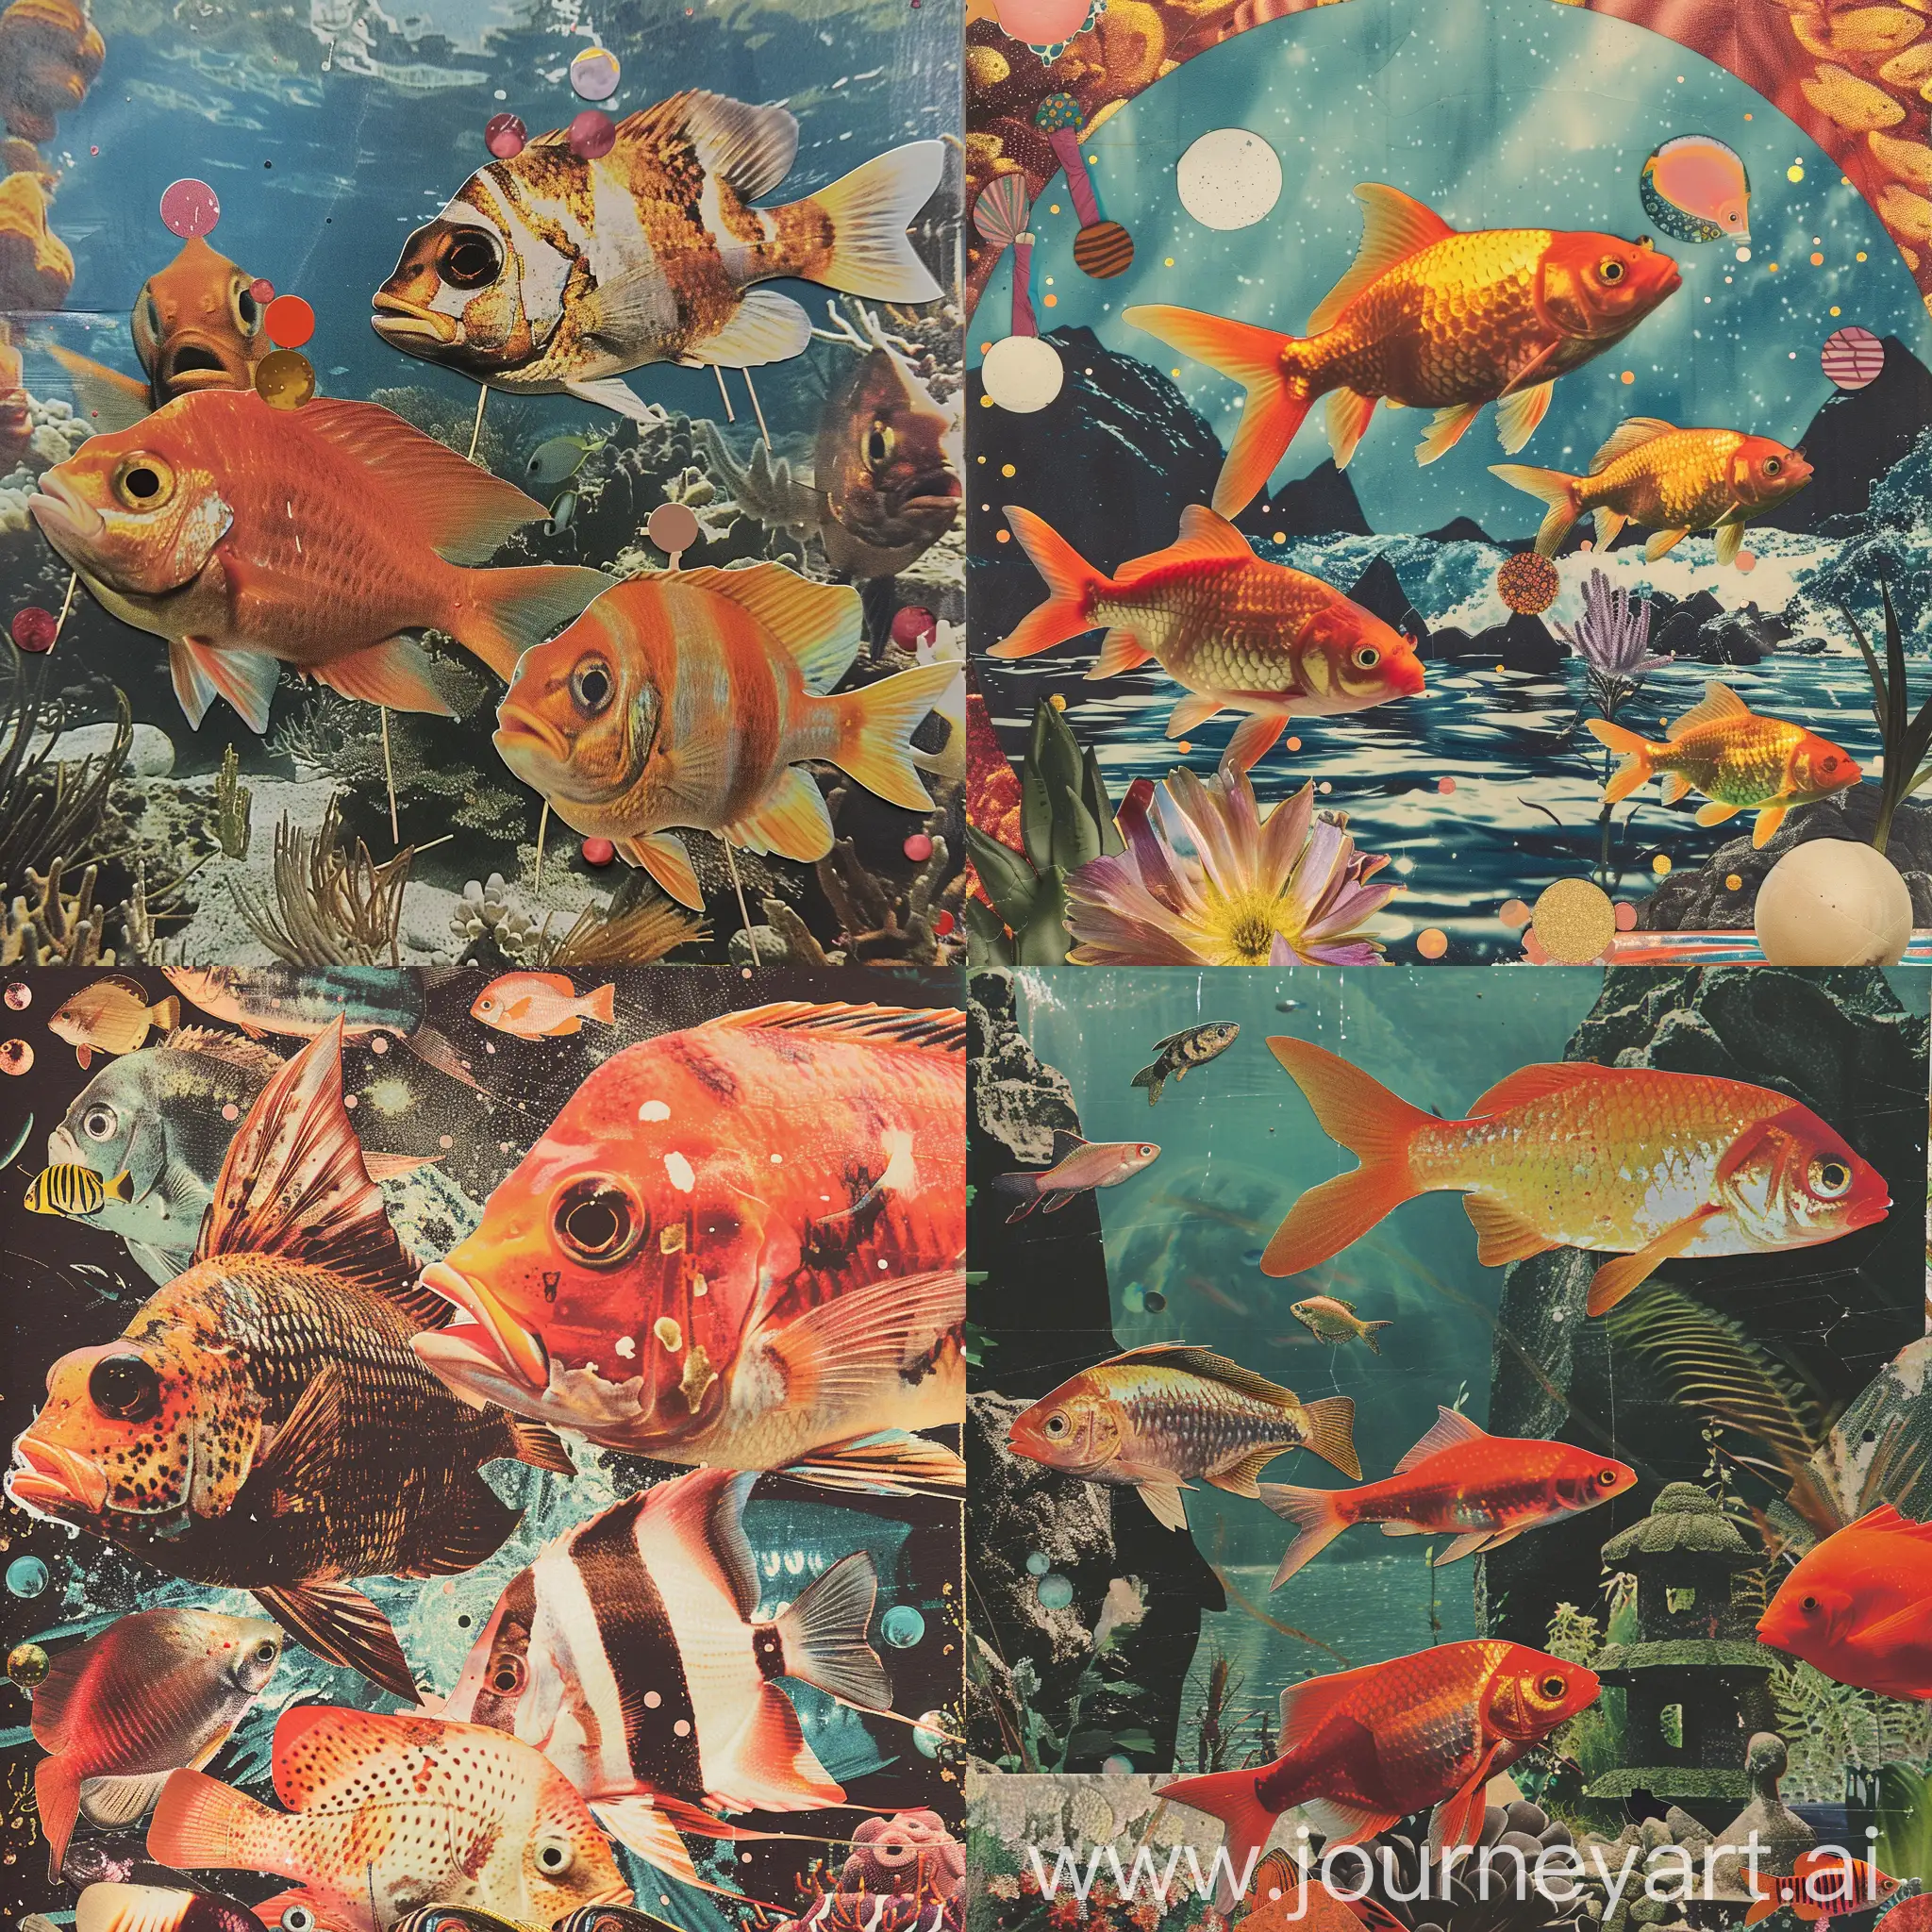 Vintage-April-Fools-Day-Fish-Party-Psychedelic-Collage-in-Wes-Anderson-Style